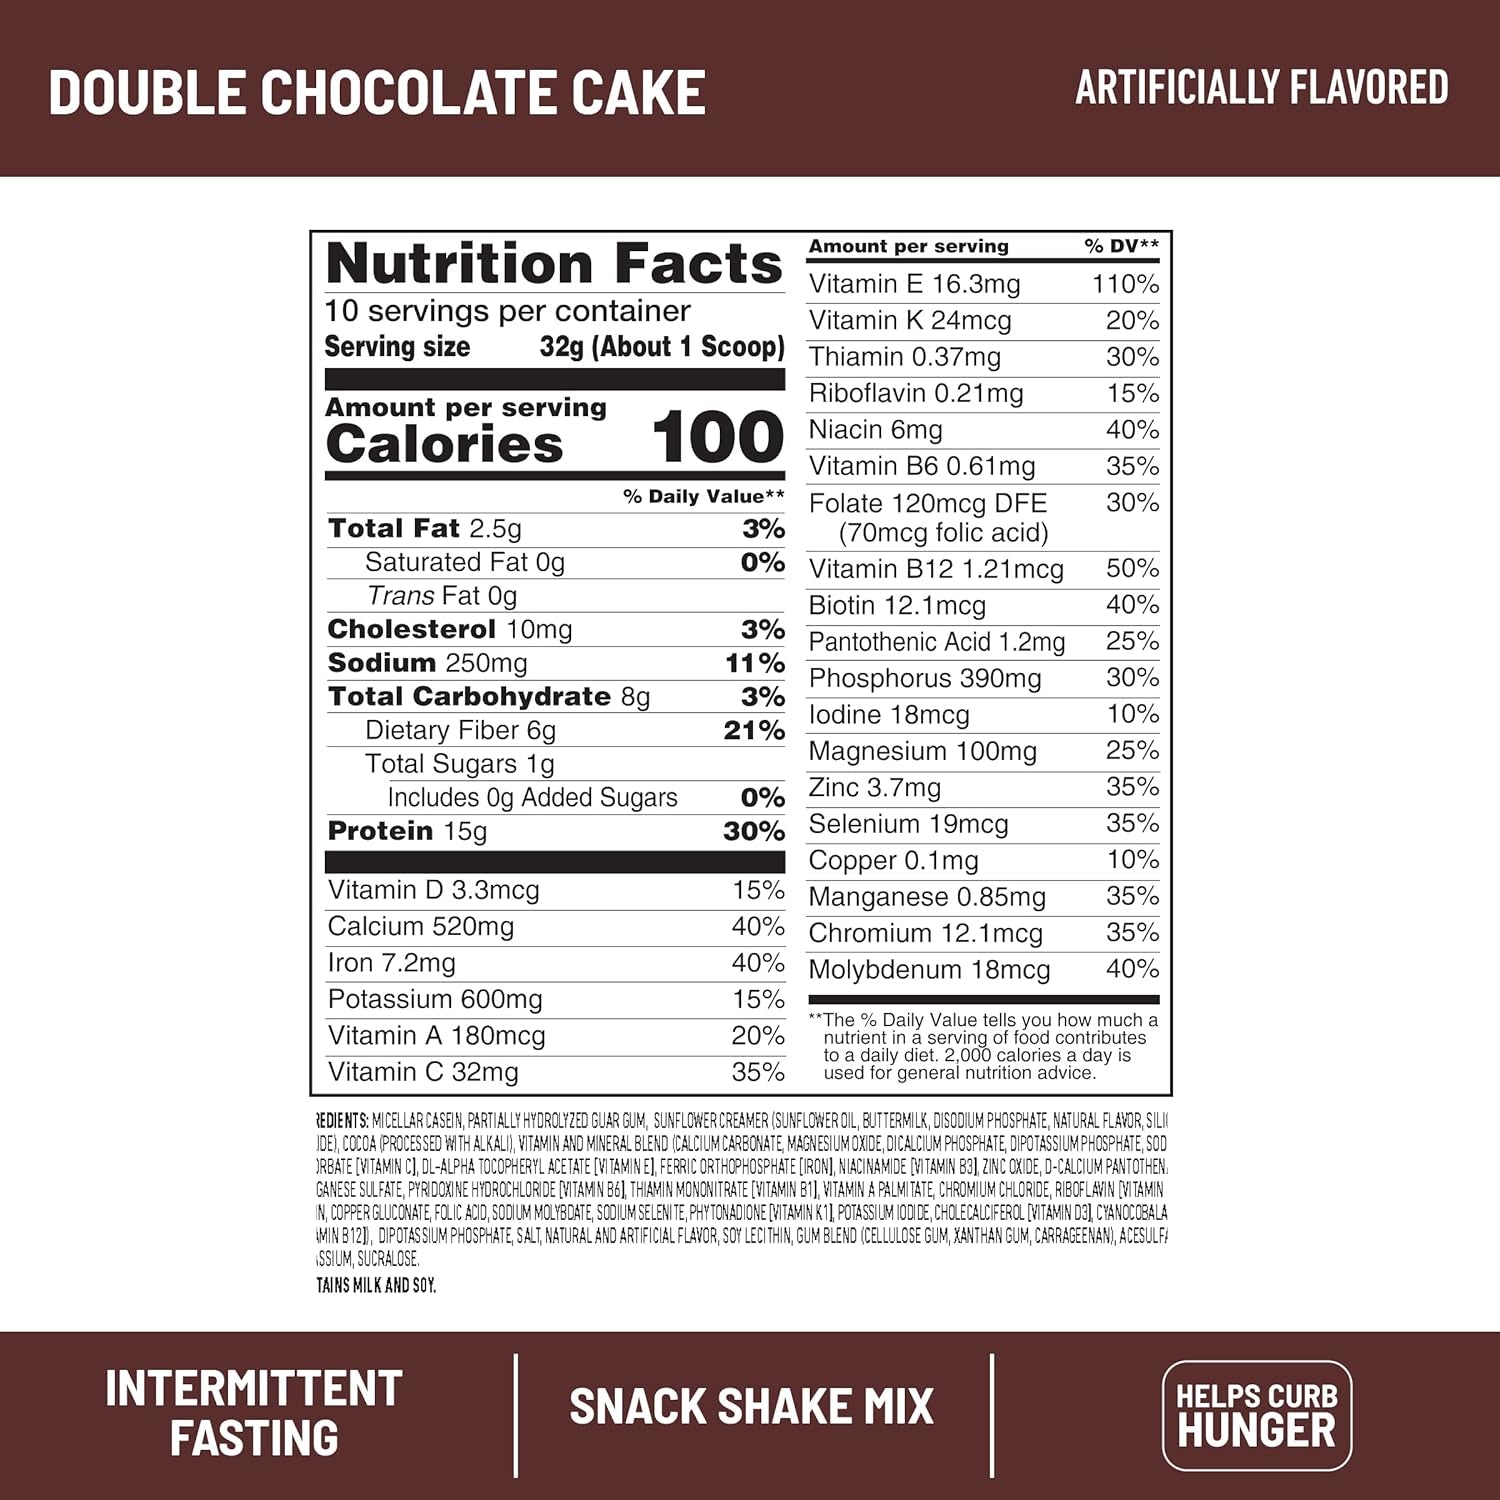 Slimfast Intermittent Fasting, Casein Protein Powder, Biotin with Vitamin & Mineral Bend, with Fiber, No Added Sugar, Snack Shake Mix- Double Chocolate Cake, 10 Servings (Pack of 2)